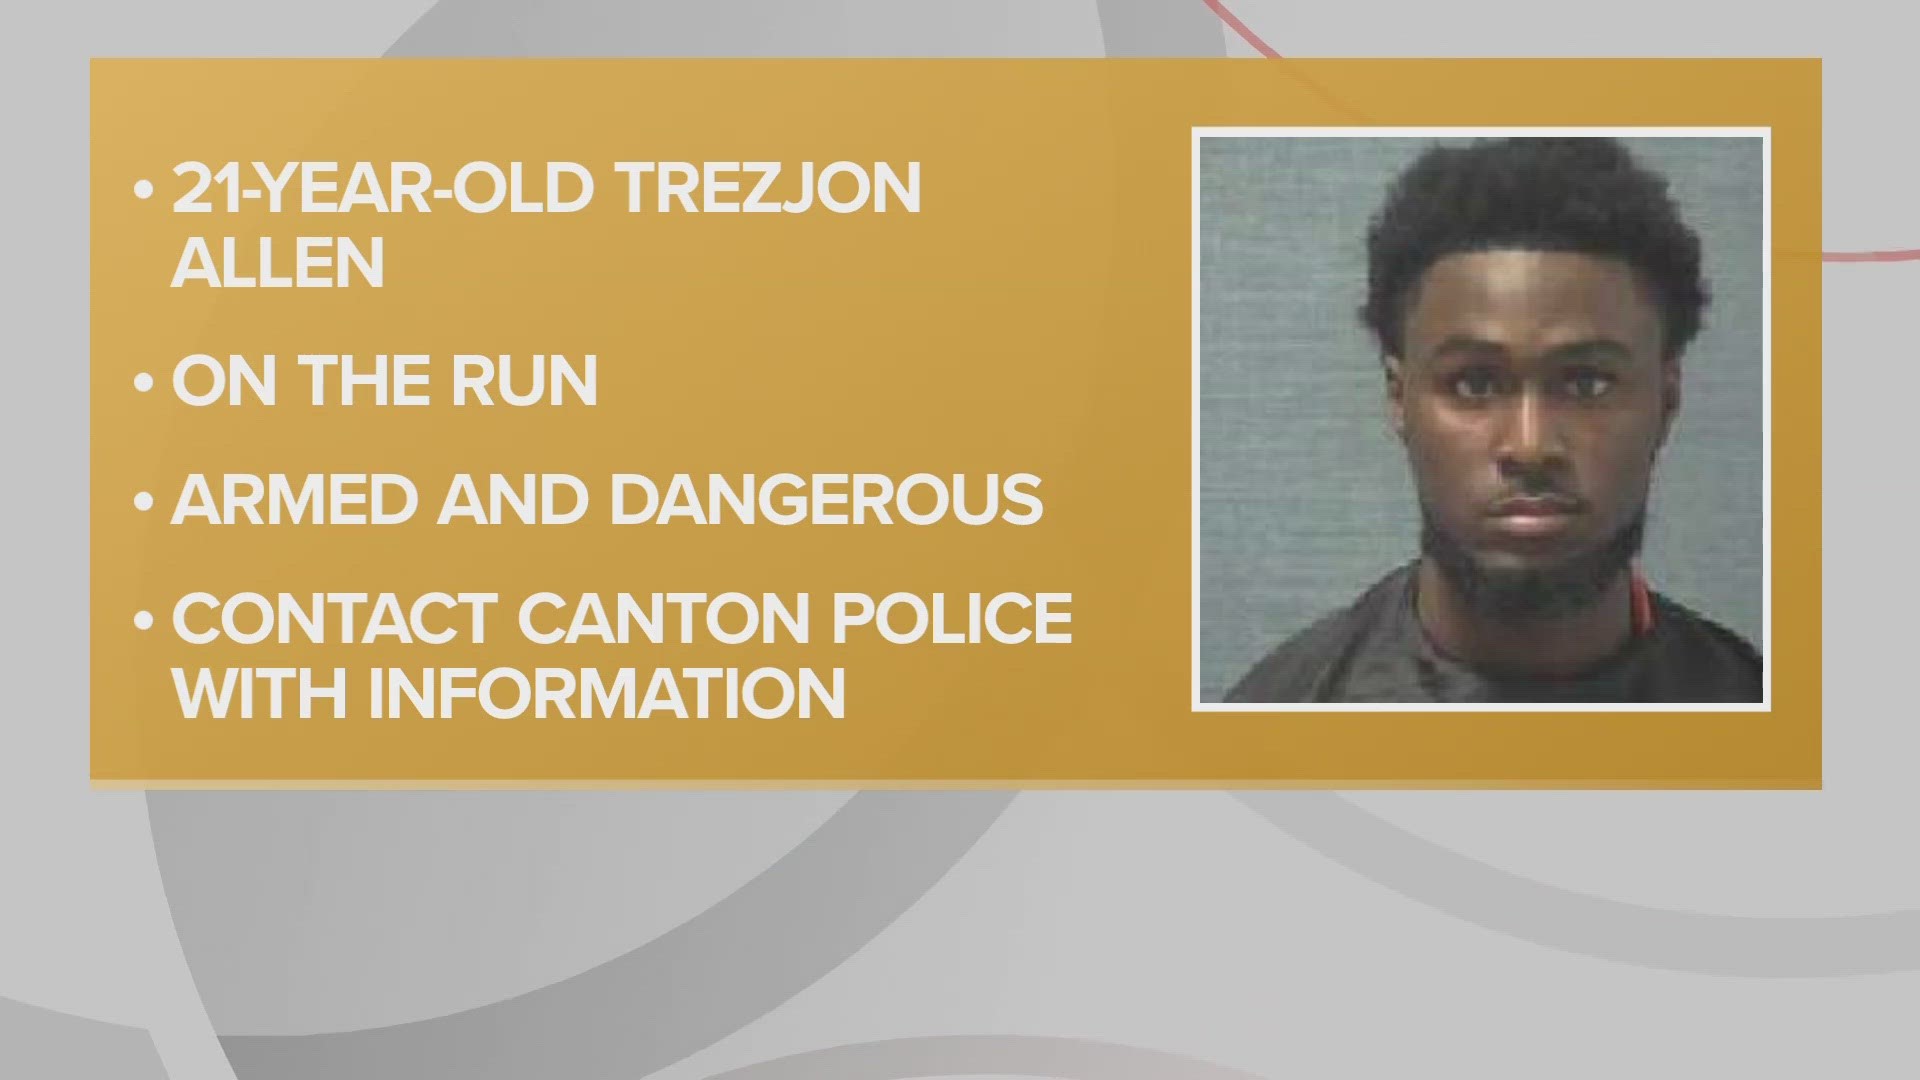 21-year-old Massillon native Trezjon Allen remains on the loose, with authorities saying he 'should be considered armed and dangerous.'